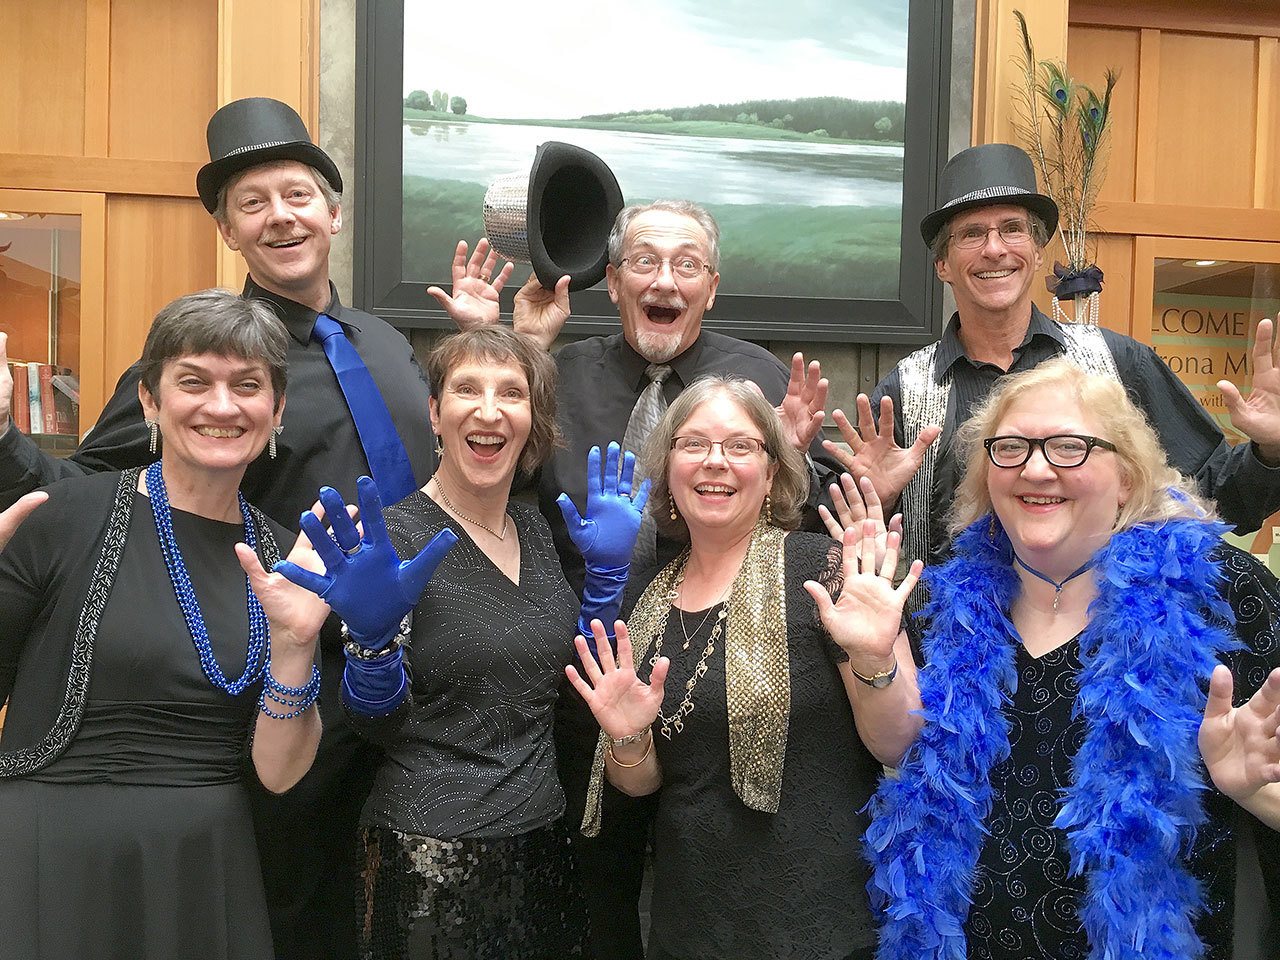 The Wild Rose Chorale, seen here, and musical guests will perform live at 7 tonight and 2:30 p.m. Sunday at First Presbyterian Church, 1111 Franklin St., Port Townsend. (Wild Rose Chorale)